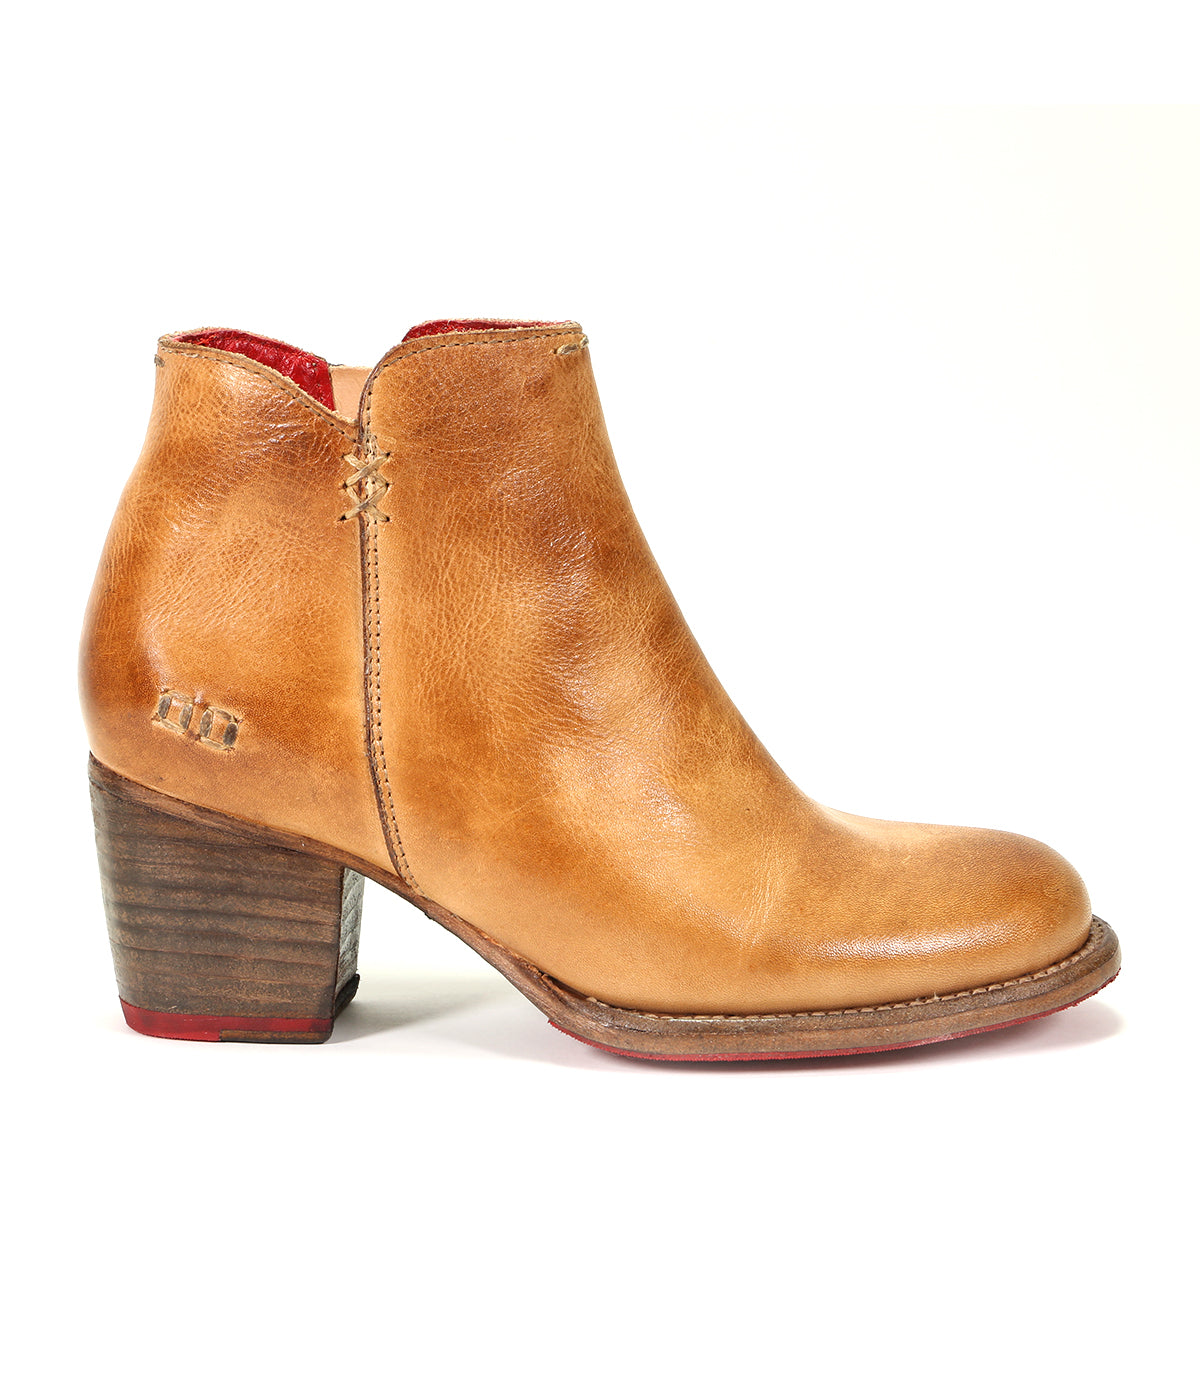 A durable women's tan leather ankle boot with a wooden heel, showcasing exceptional handmade craftsmanship called the Yell by Bed Stu.